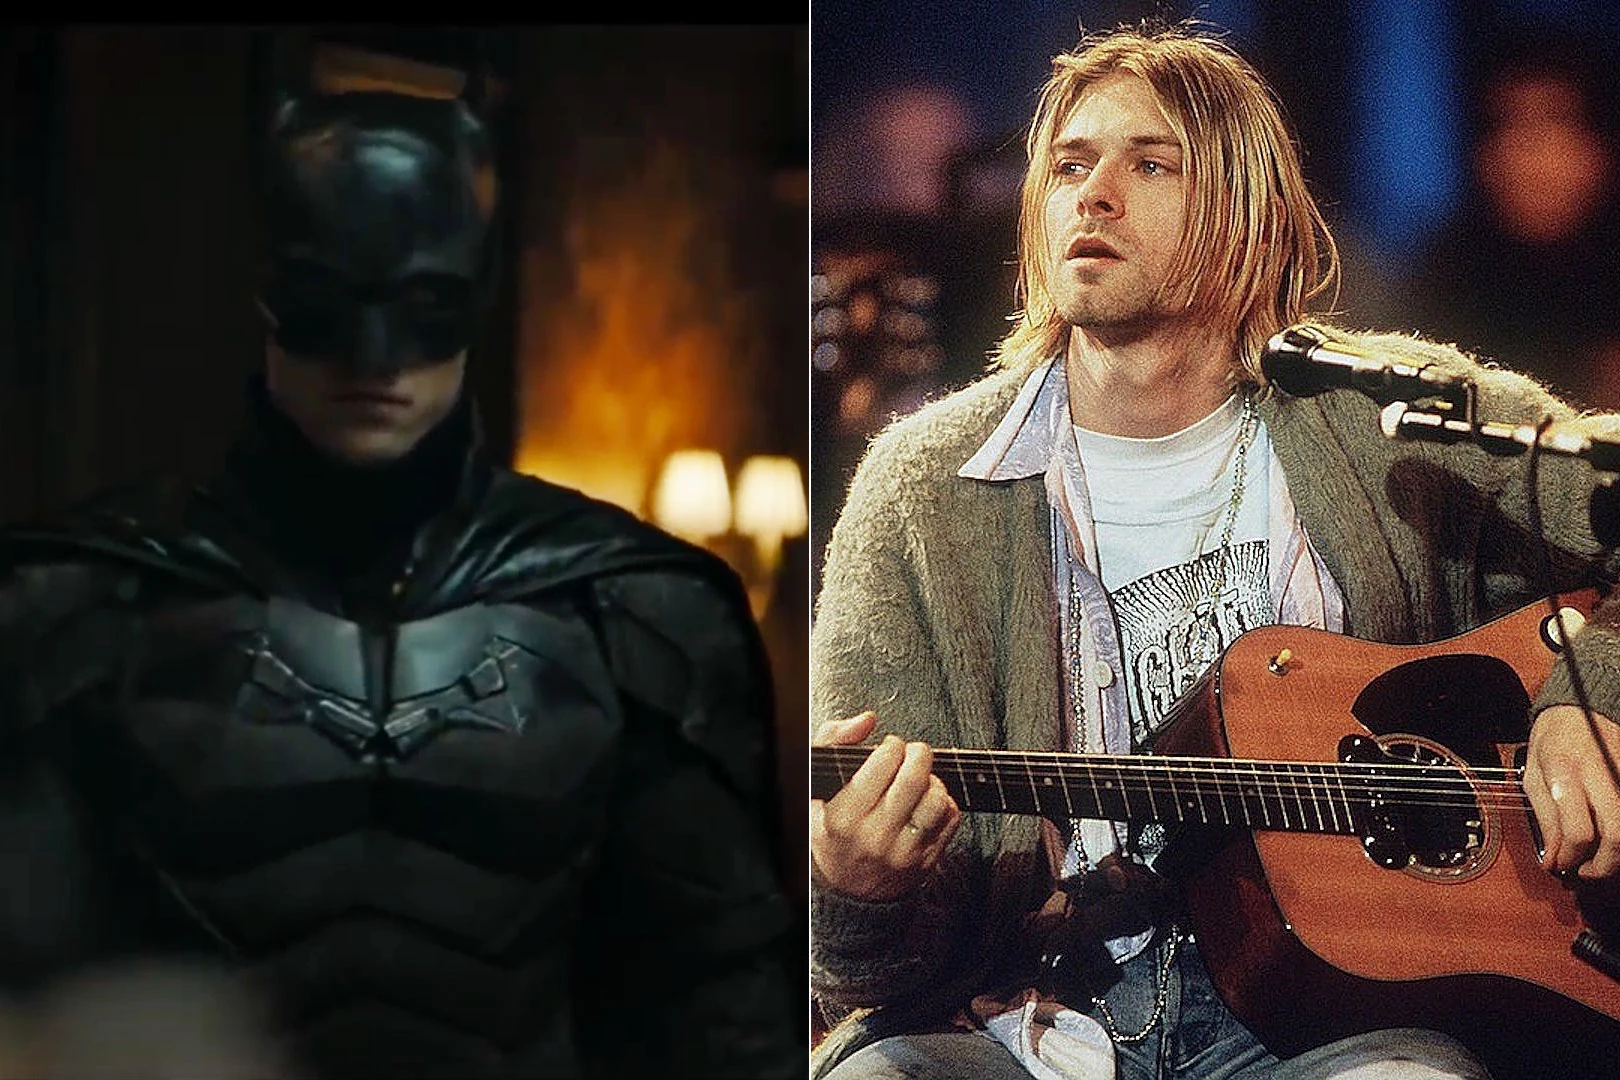 The Batman' Trailer Is Using a Haunting Nirvana Song